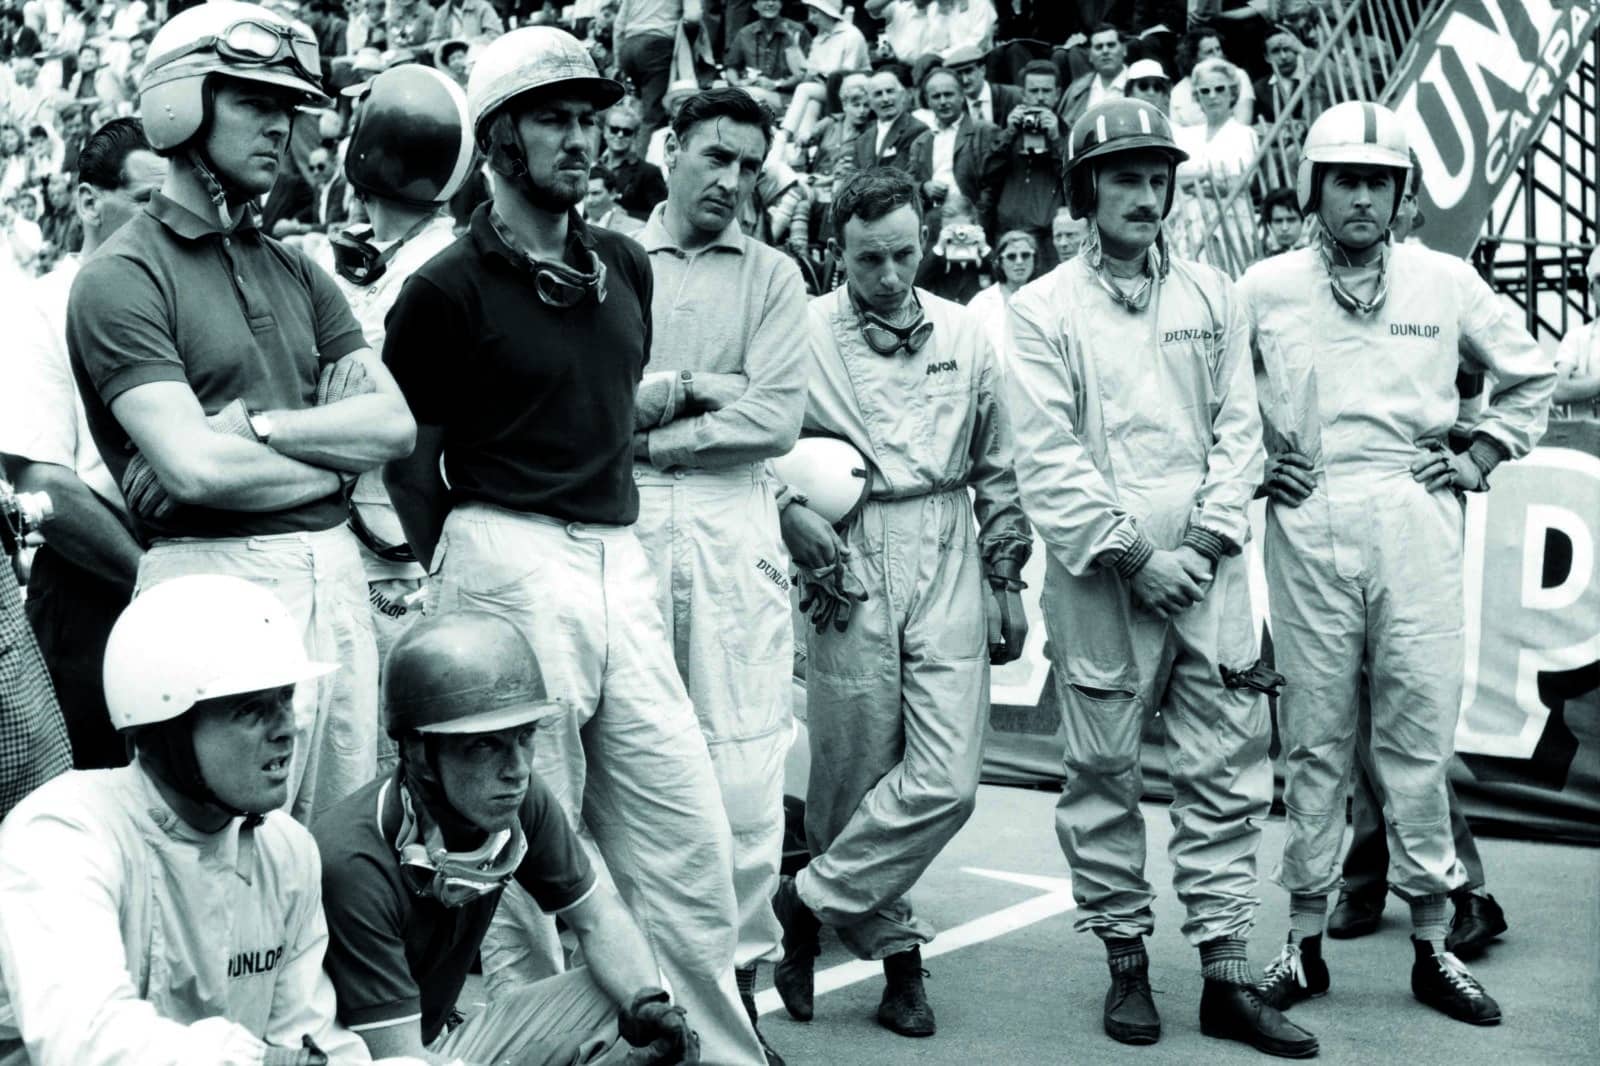 Graham-Hill-and-Jack-Brabham-among-drivers-at-briefing-before-the-1960-Monaco-Grand-Prix